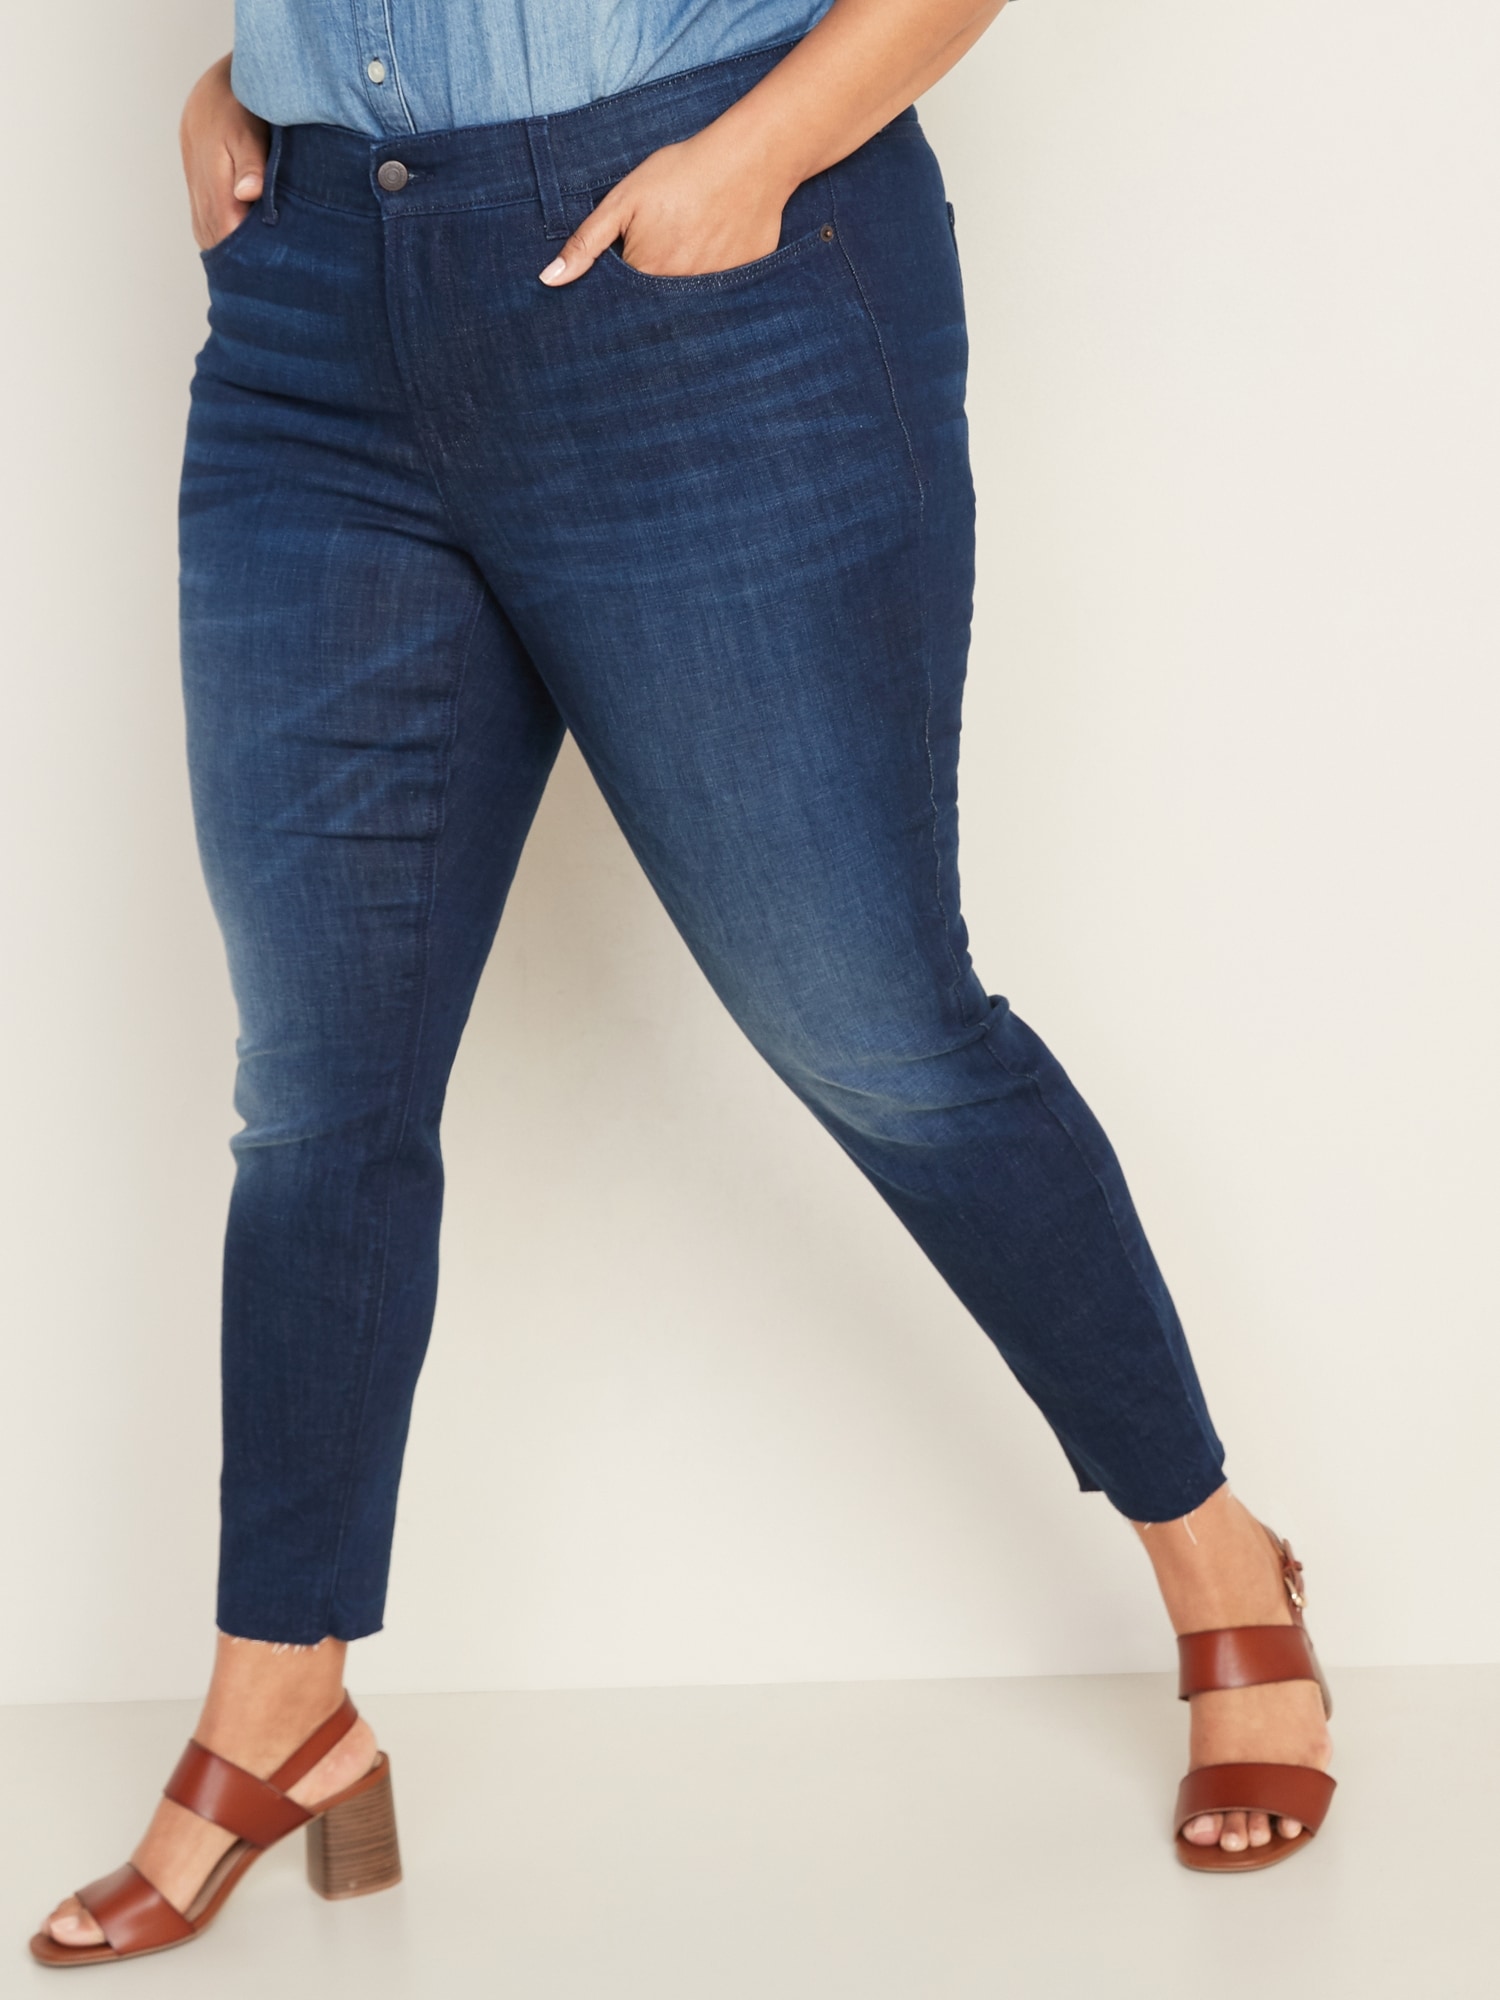 riders high waisted jeans